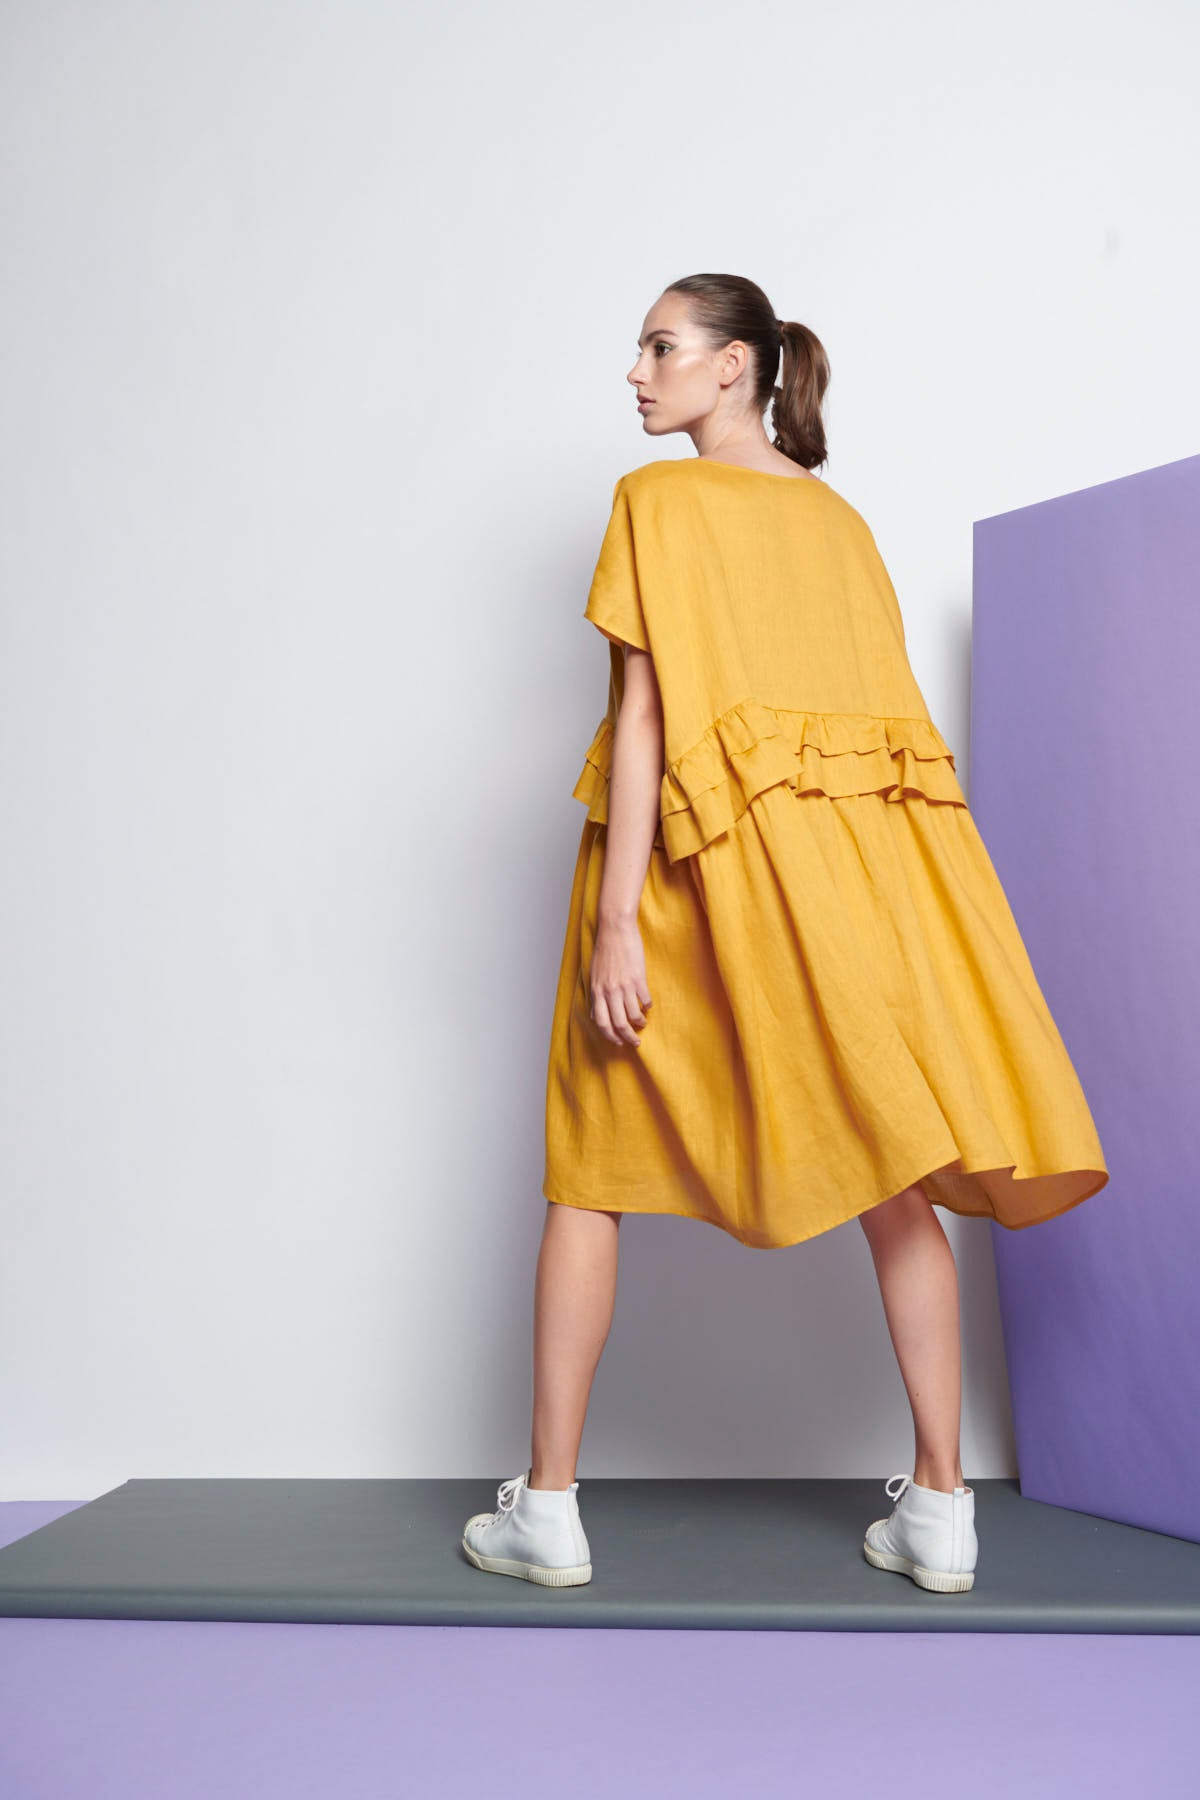 An easy-fit, knee-length tiered ruffle linen dress with round neckline and short sleeves in yellow